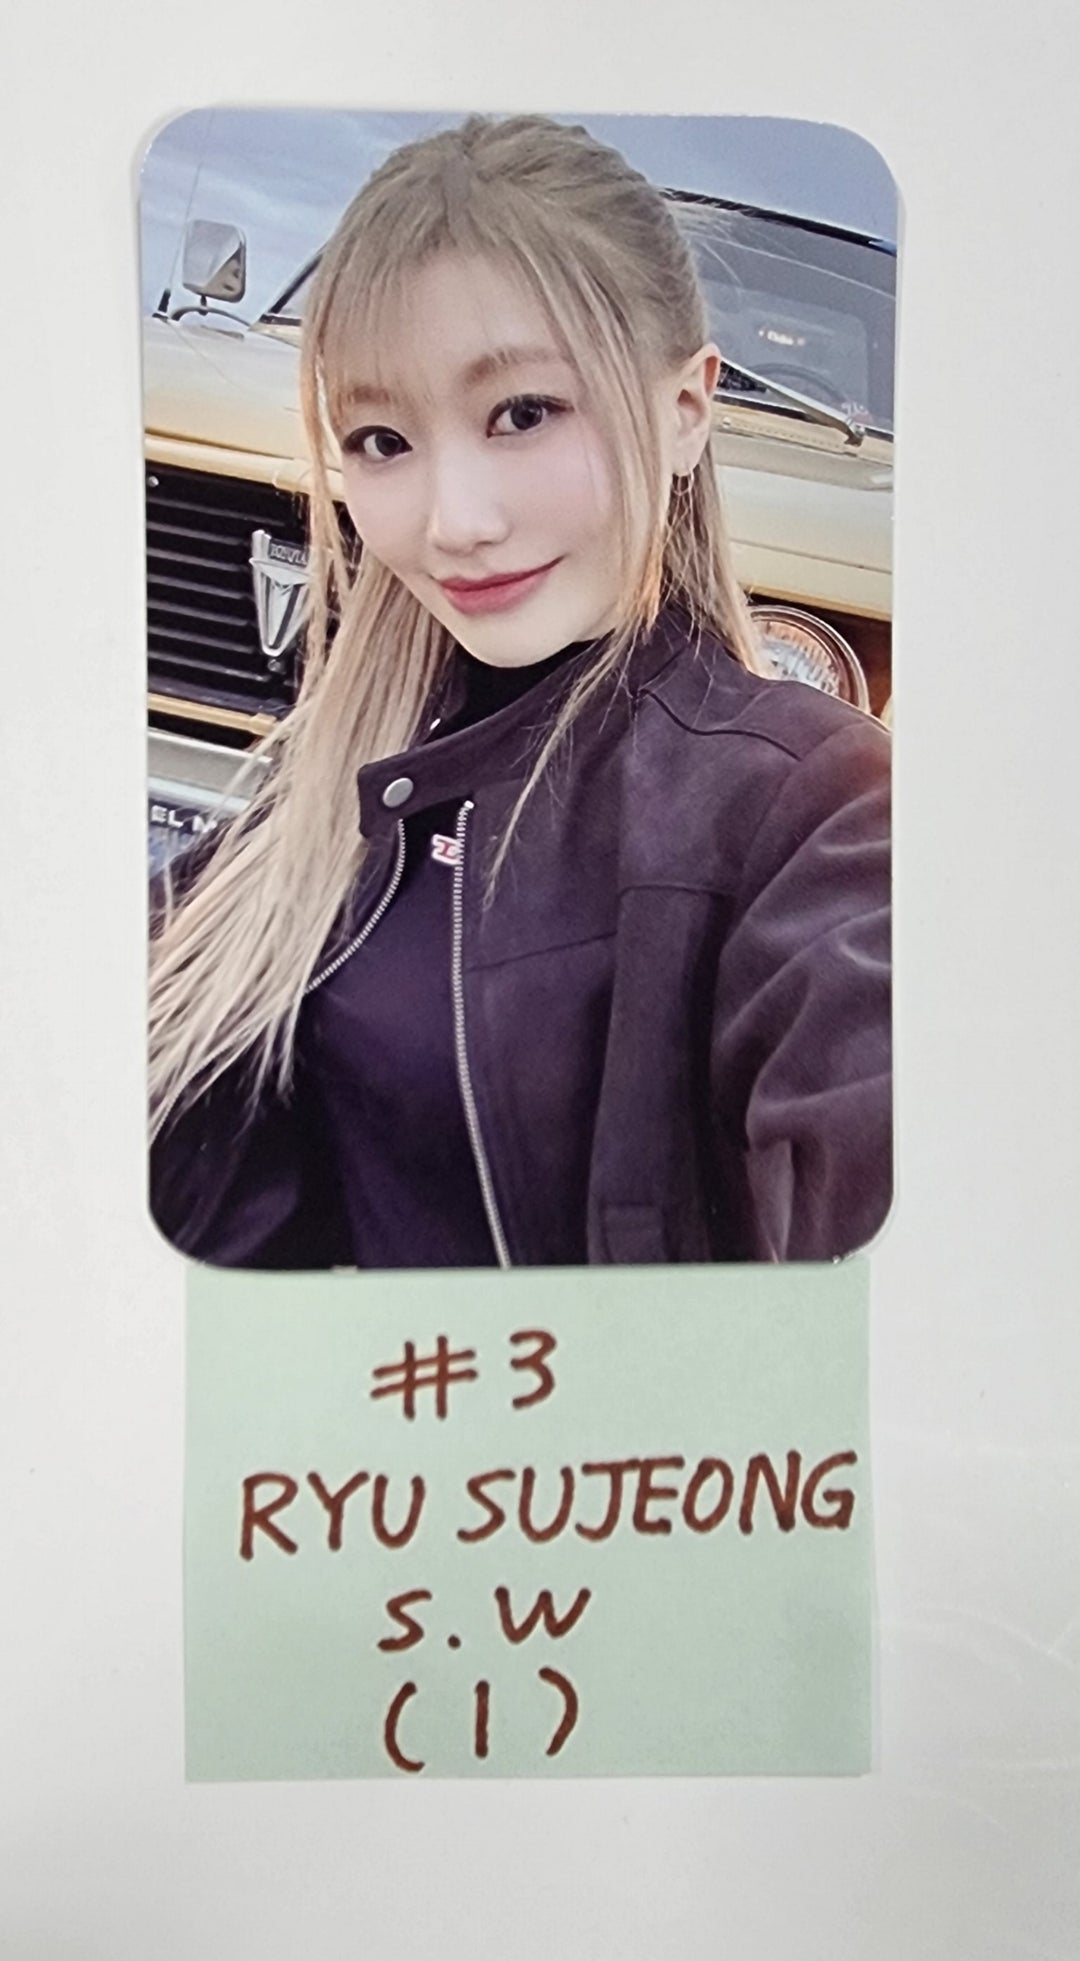 Ryu Sujeong "Archive of emotions" - Soundwave Pre-Order Benefit Photocard